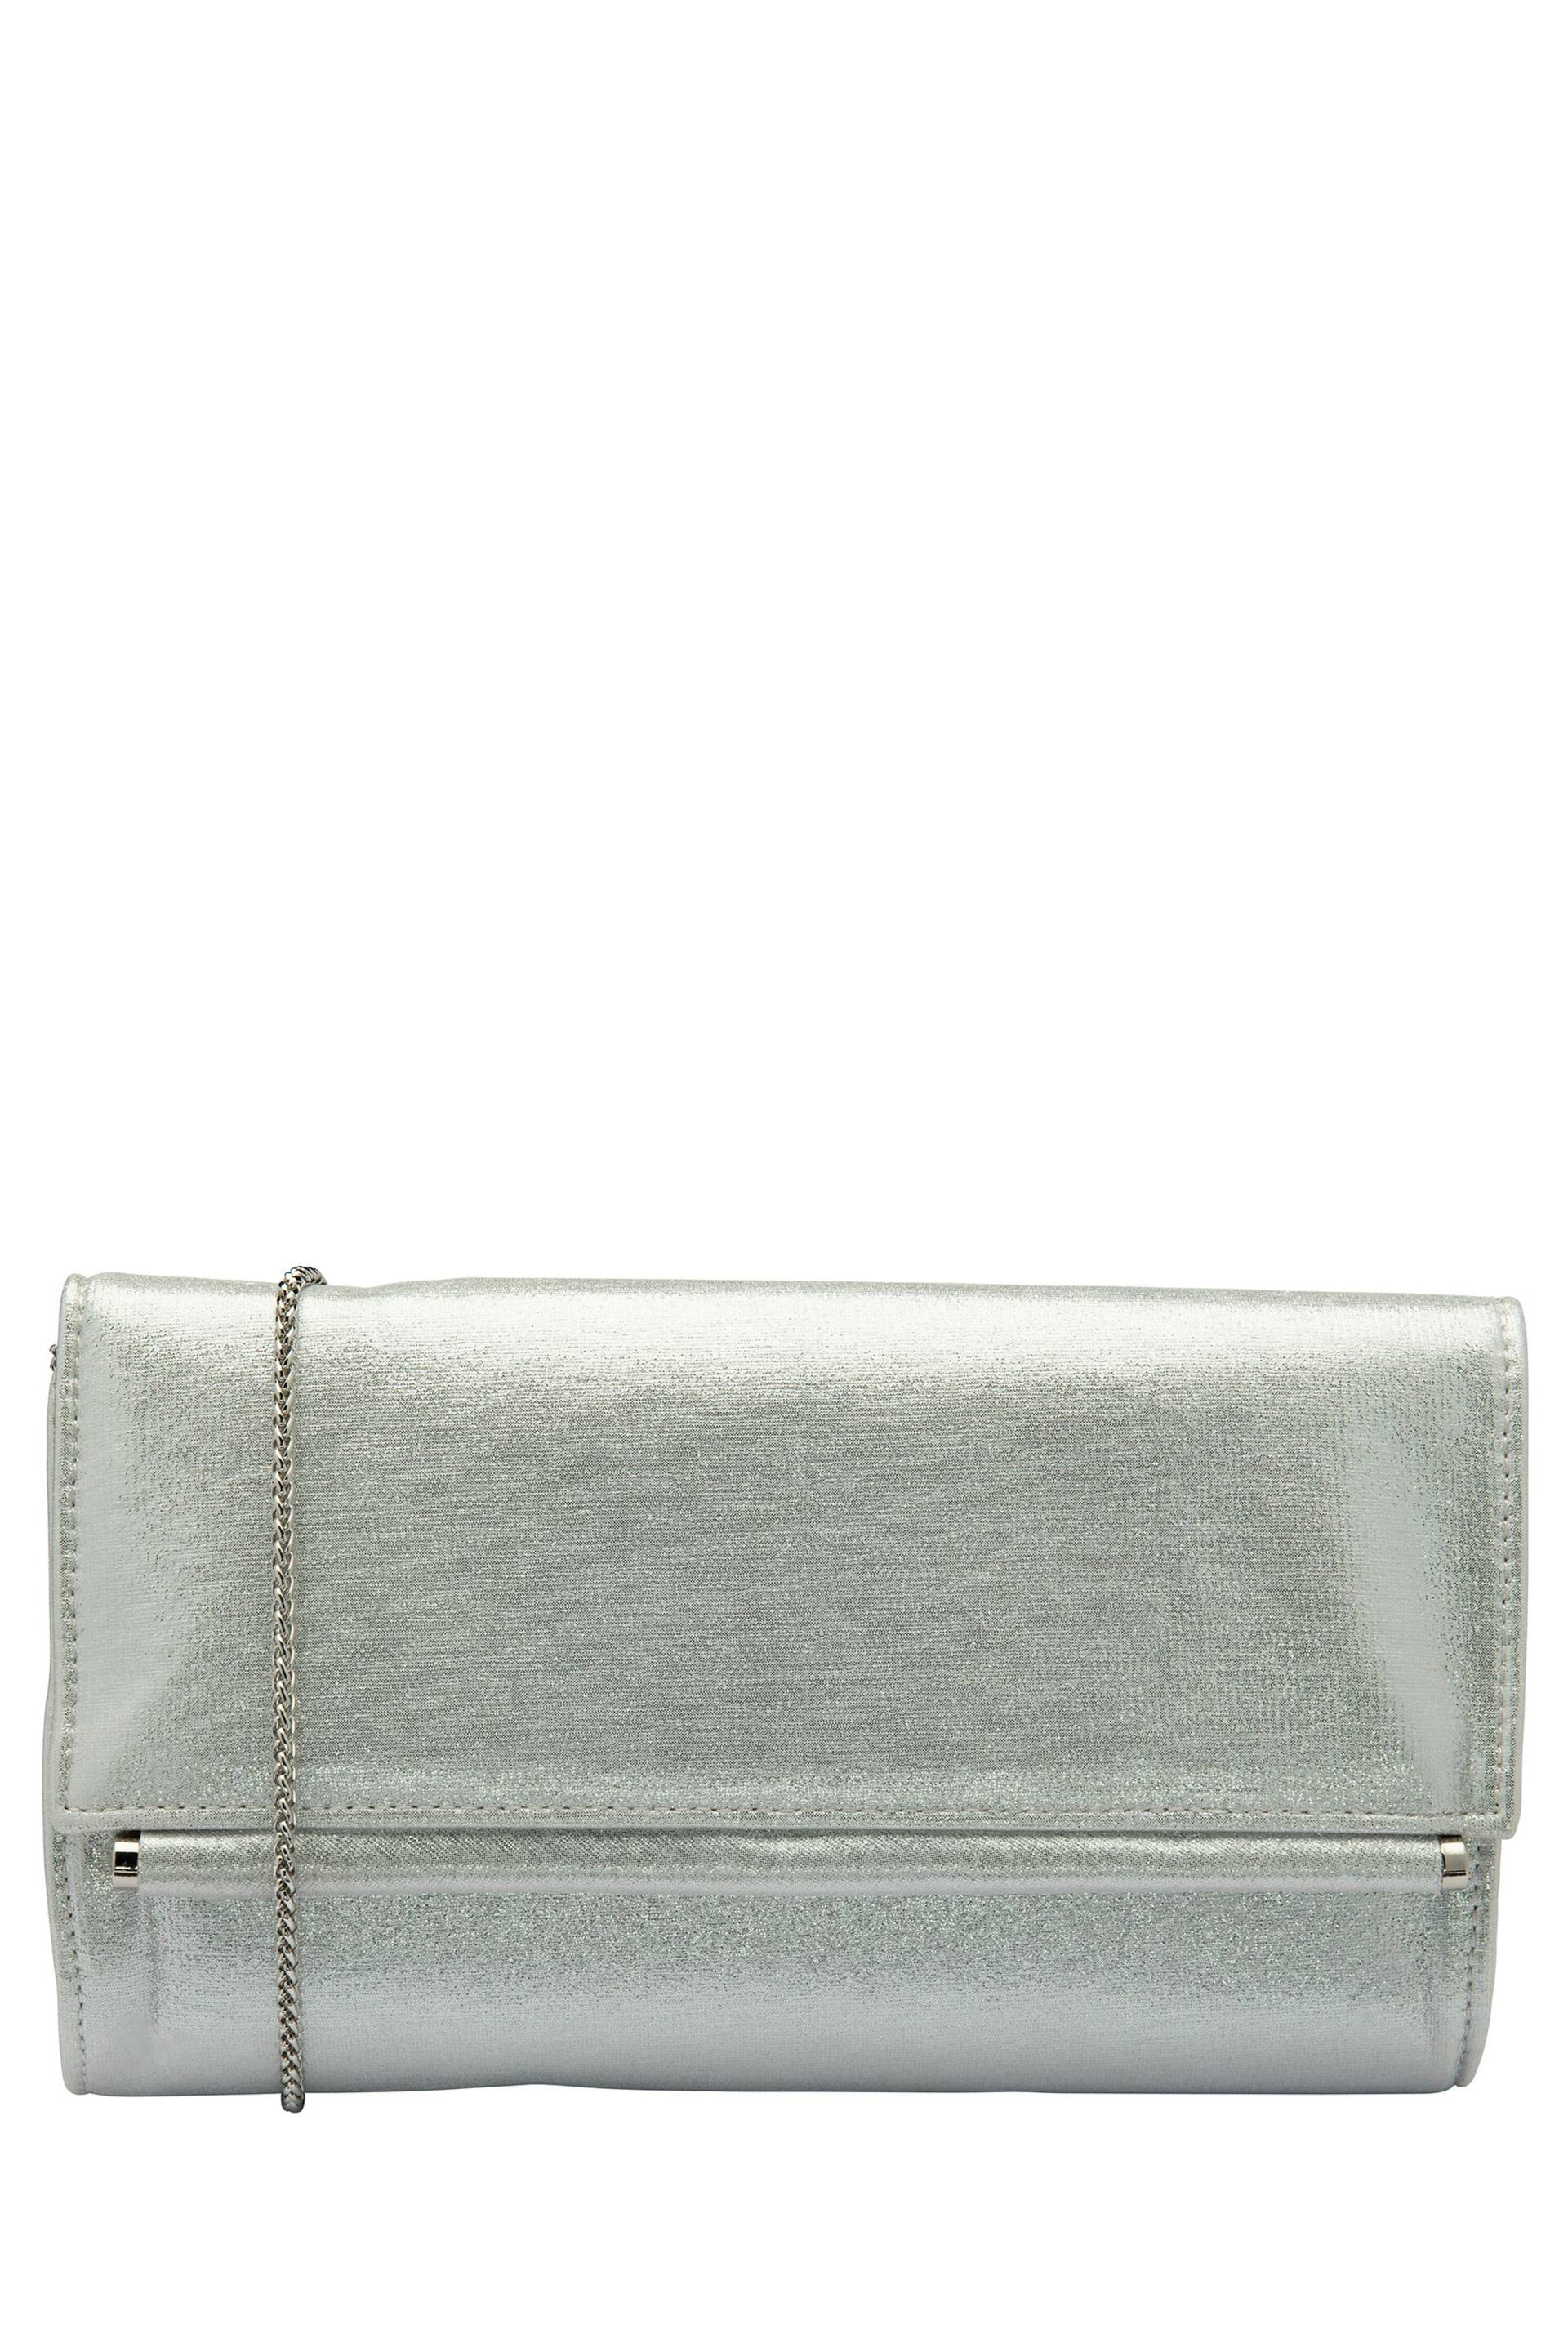 Lotus Silver Clutch Bag With Chain - Image 1 of 4